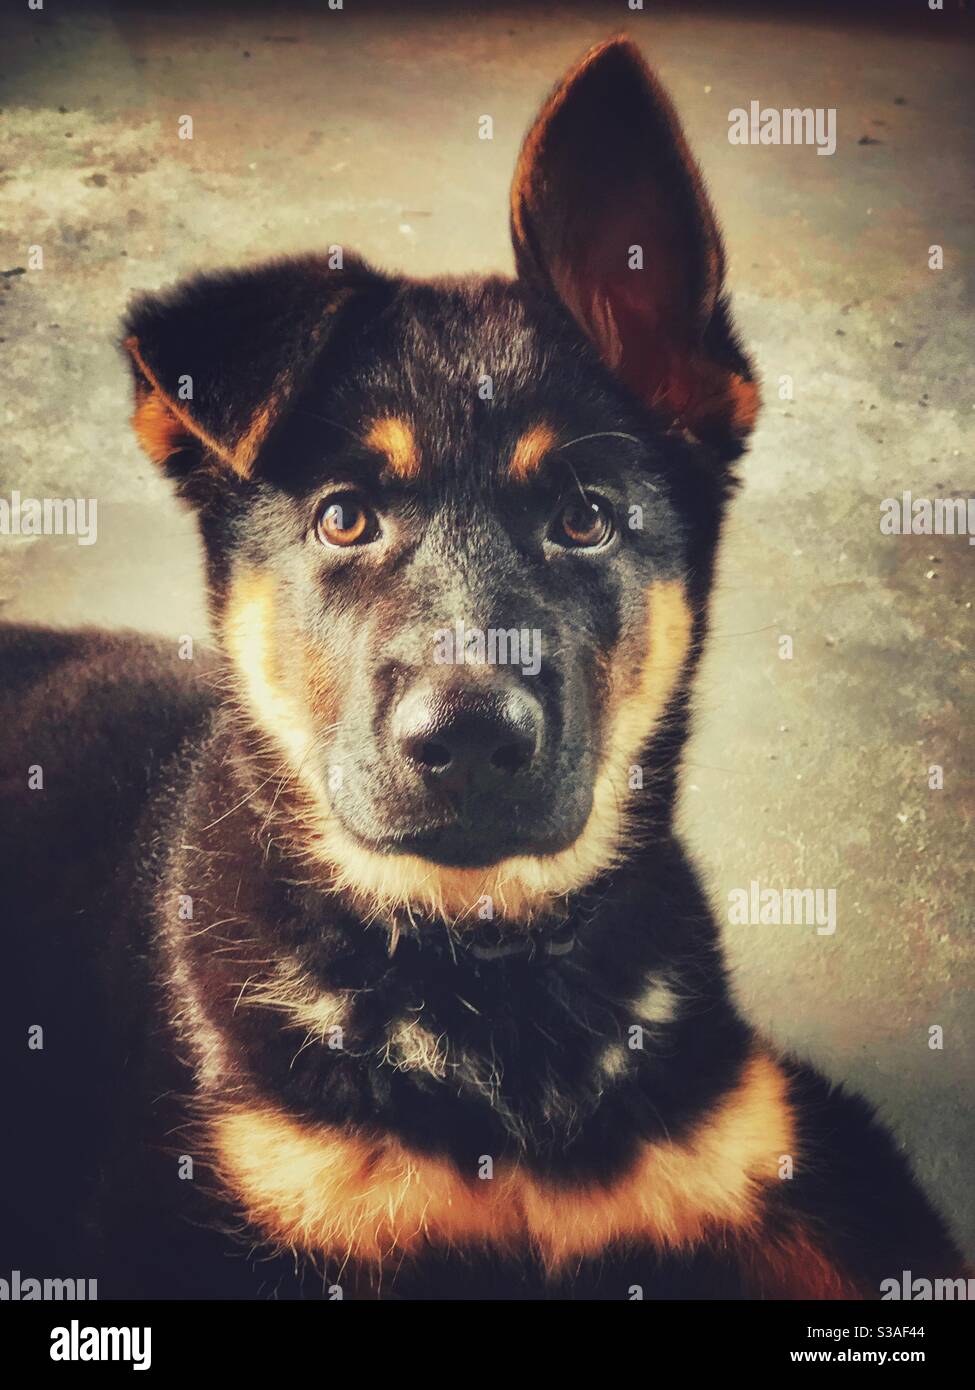 German Shepherd puppy portrait with one ear standing up and the other still floppy Stock Photo